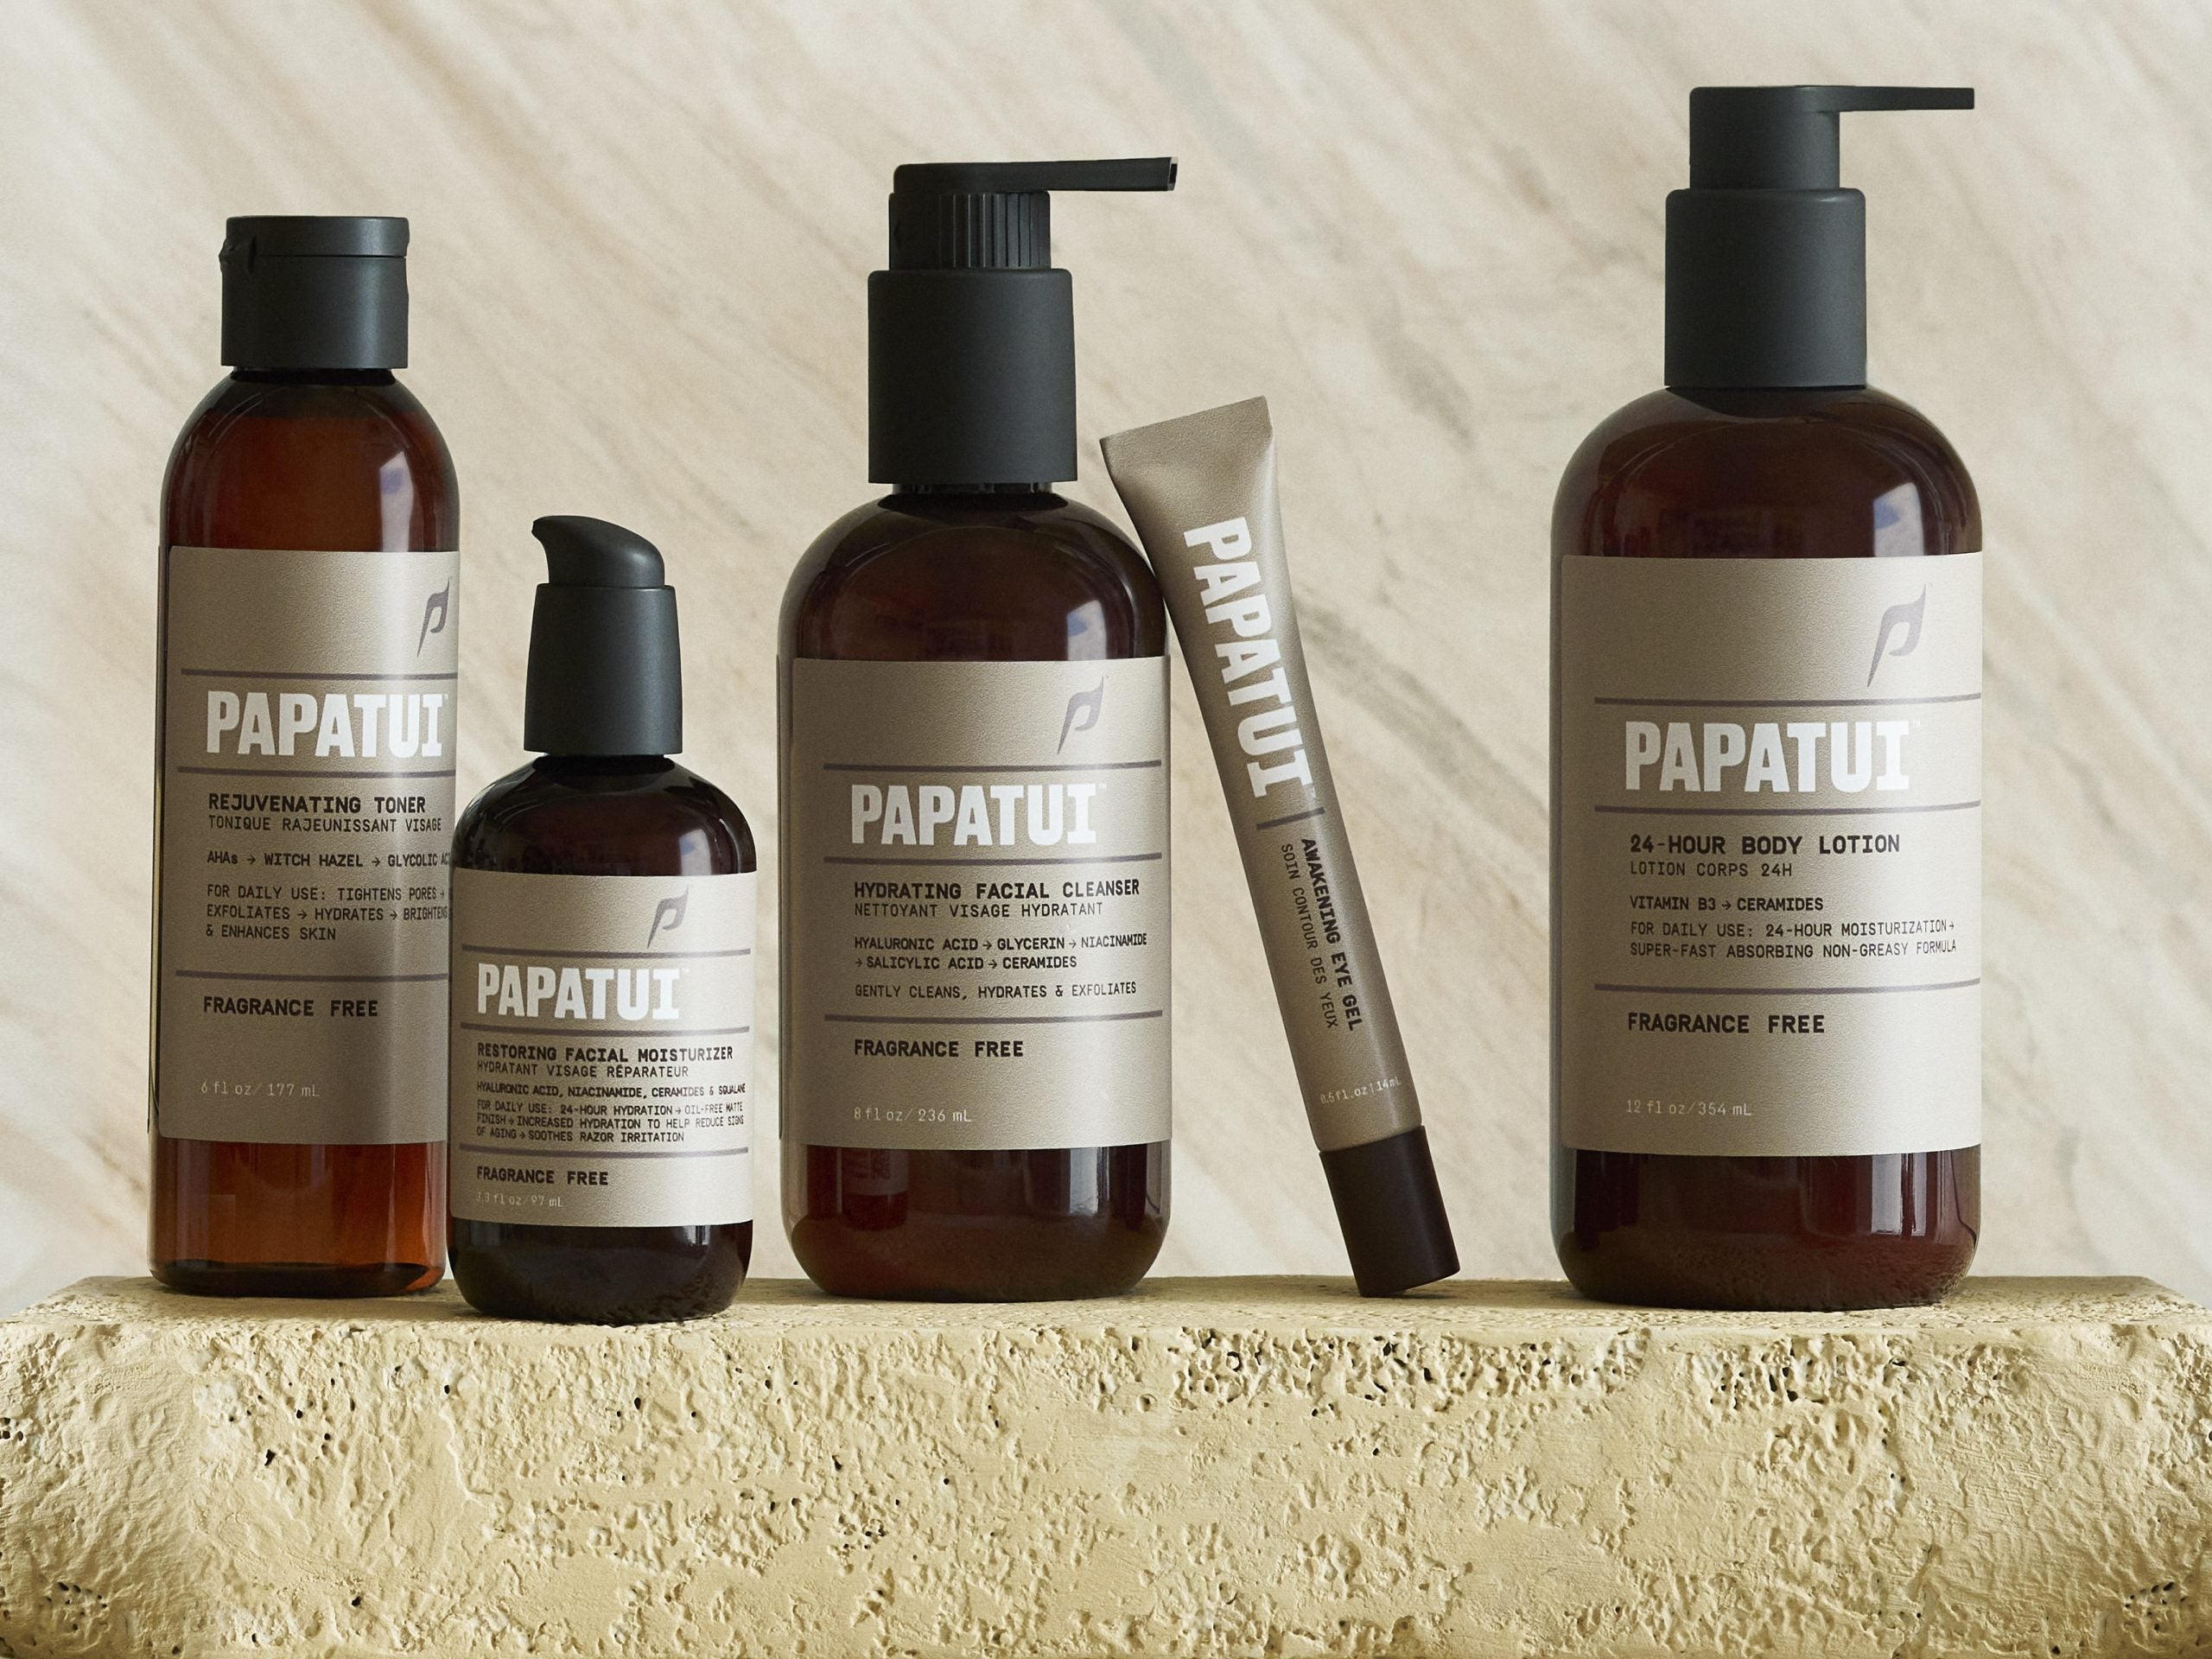 Dwayne Johnson Honors His Lineage With New Skincare Brand Papatui